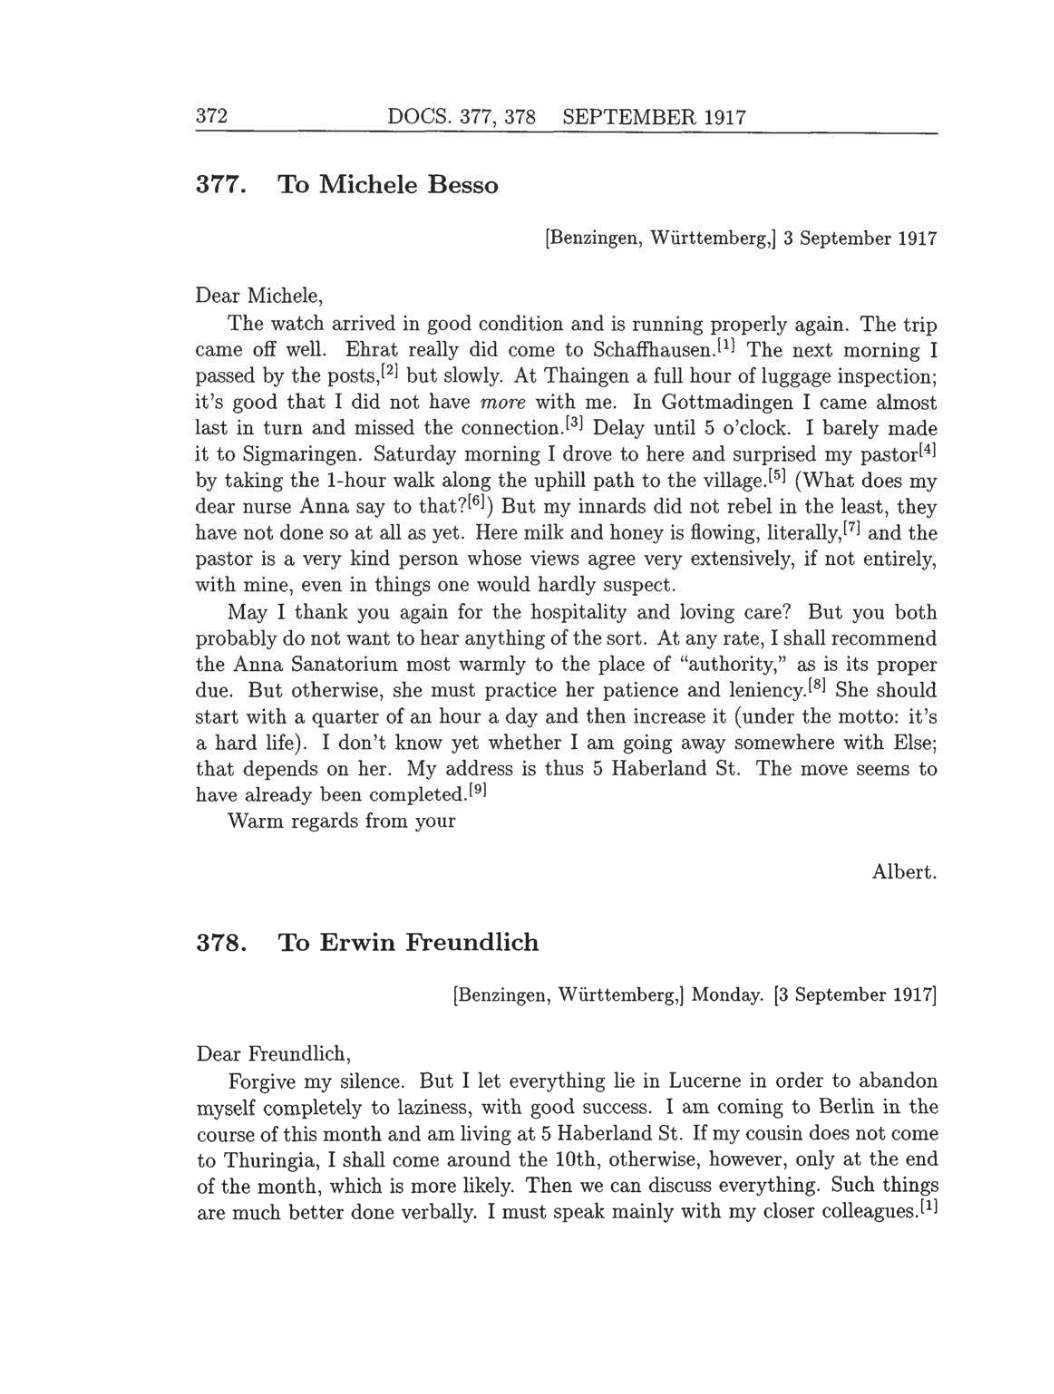 Volume 8: The Berlin Years: Correspondence, 1914-1918 (English translation supplement) page 372